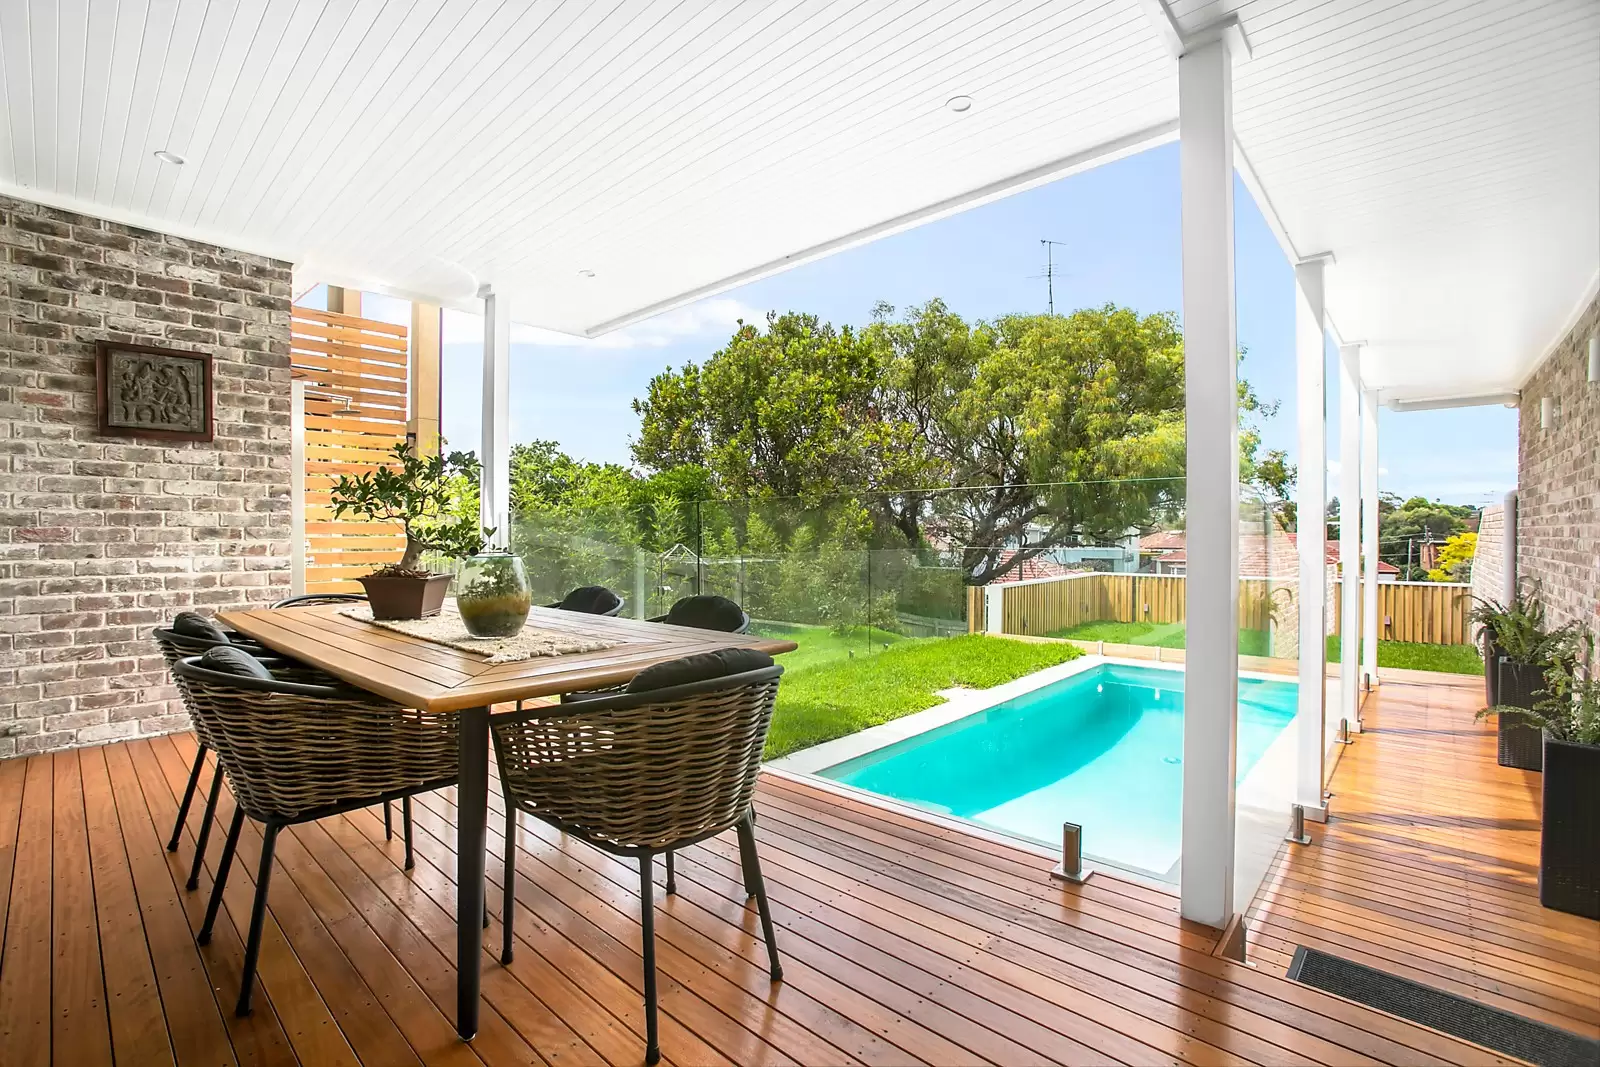 Photo #5: 75A Mons Avenue, Maroubra - Sold by Sydney Sotheby's International Realty